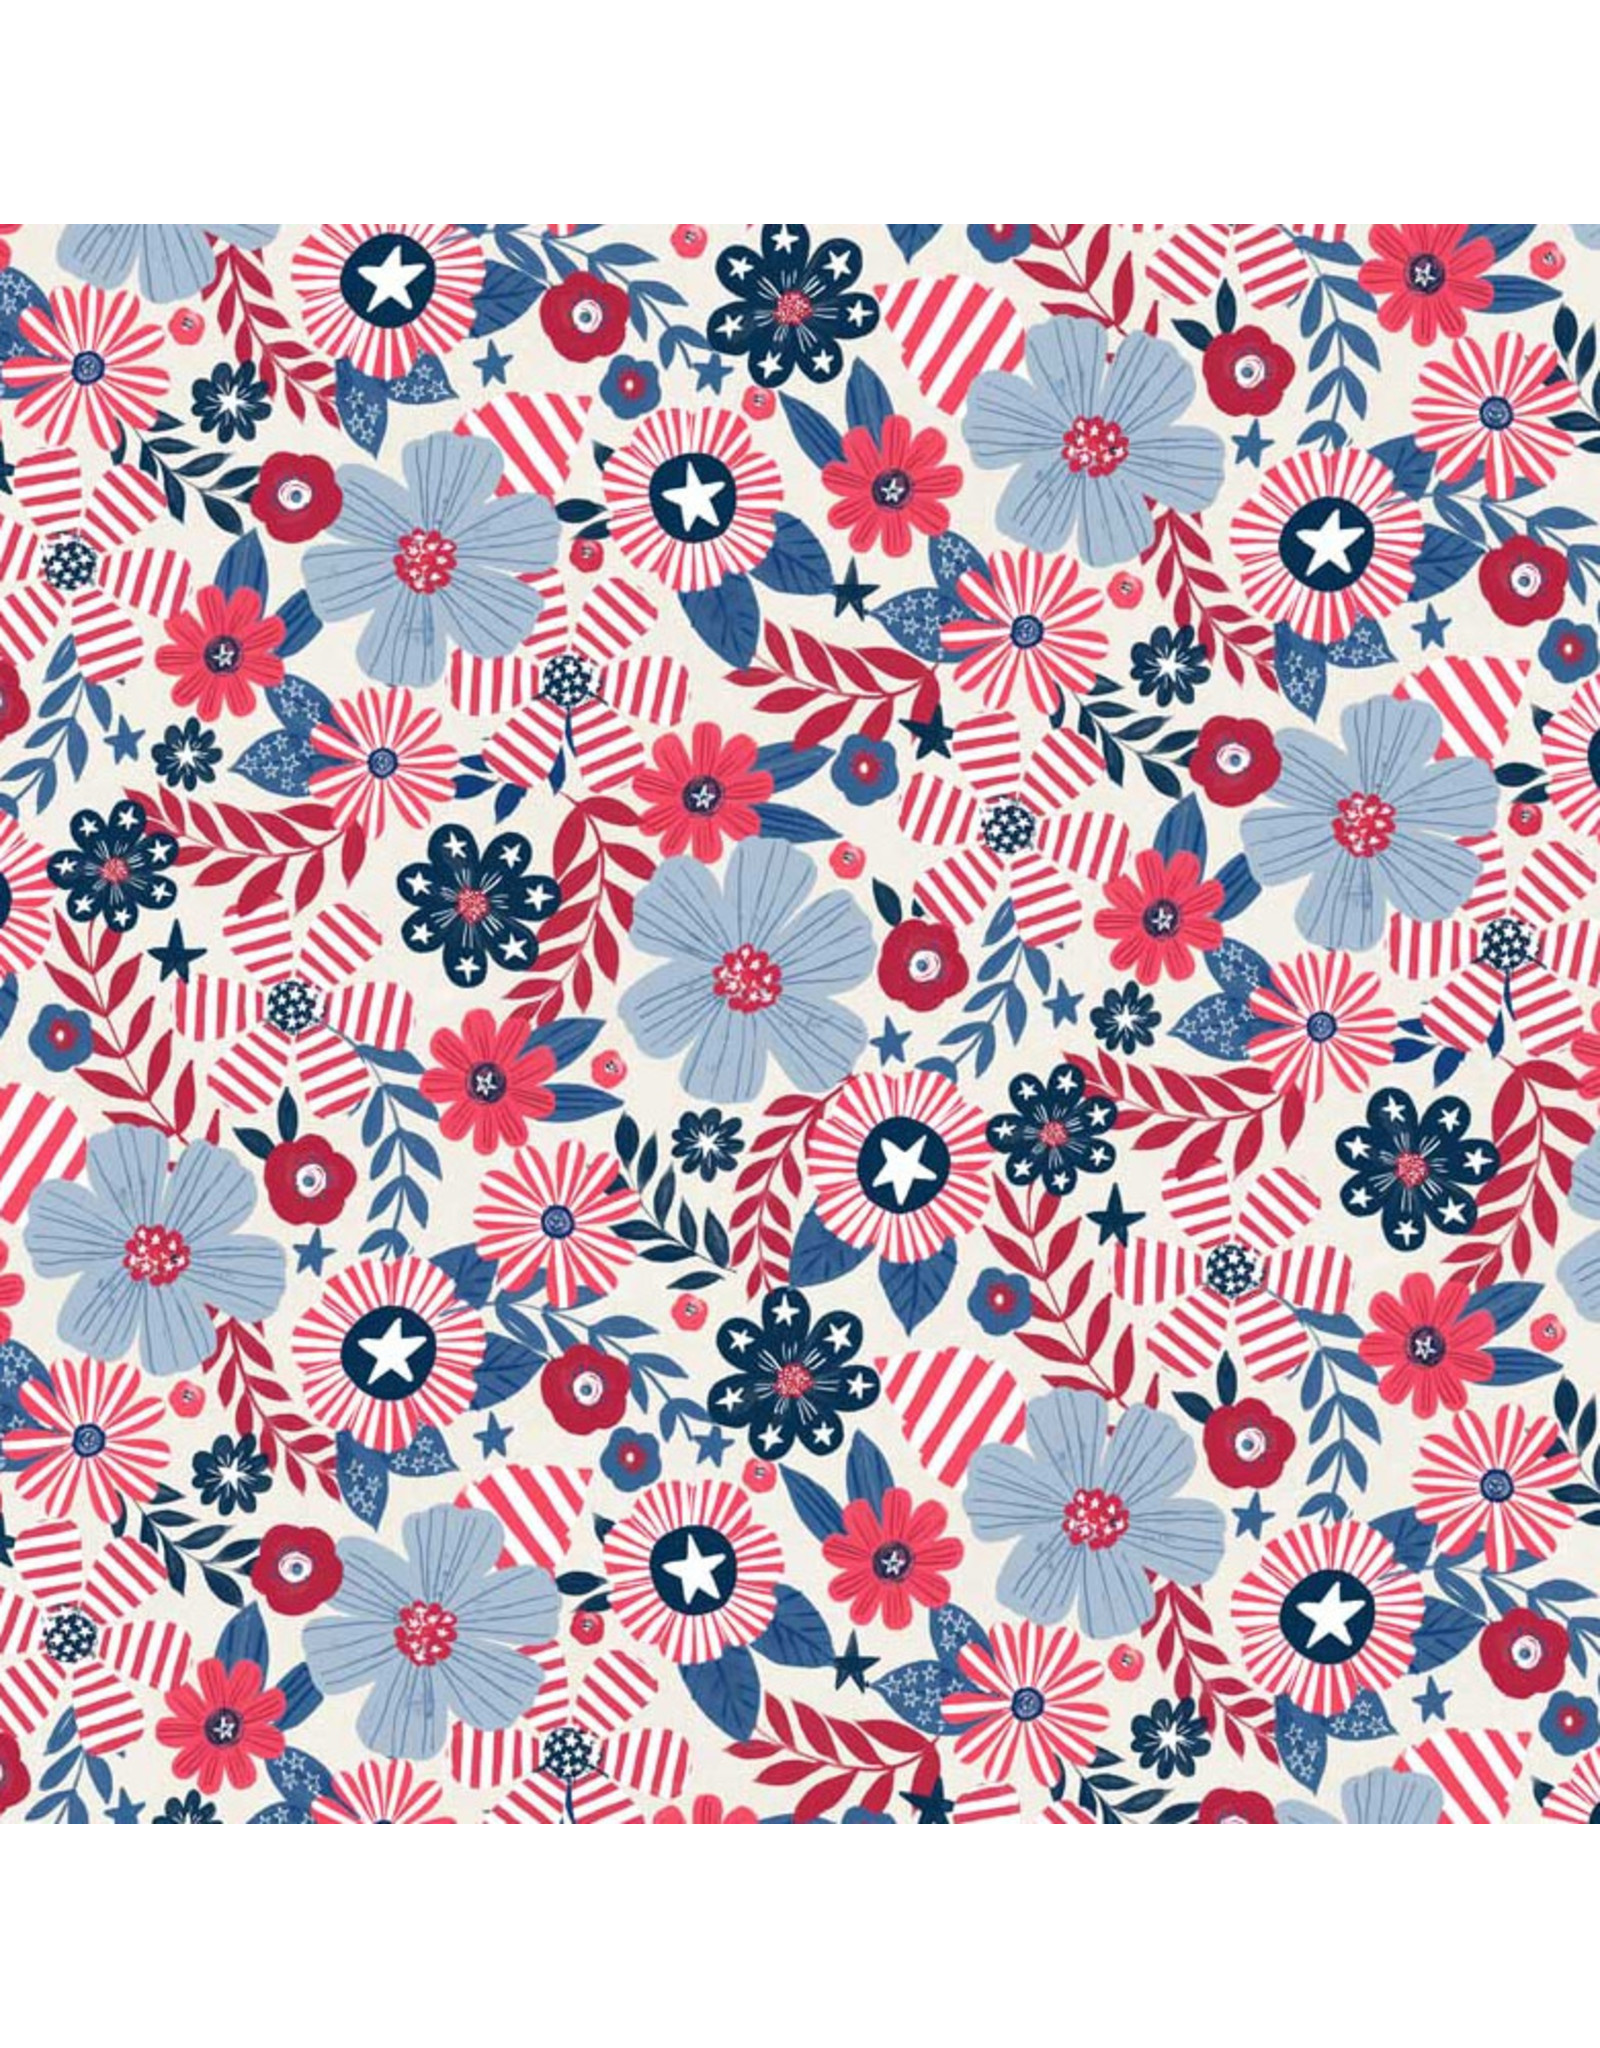 P & B Textiles Patchwork Americana, Floral in Multi, Fabric Half-Yards